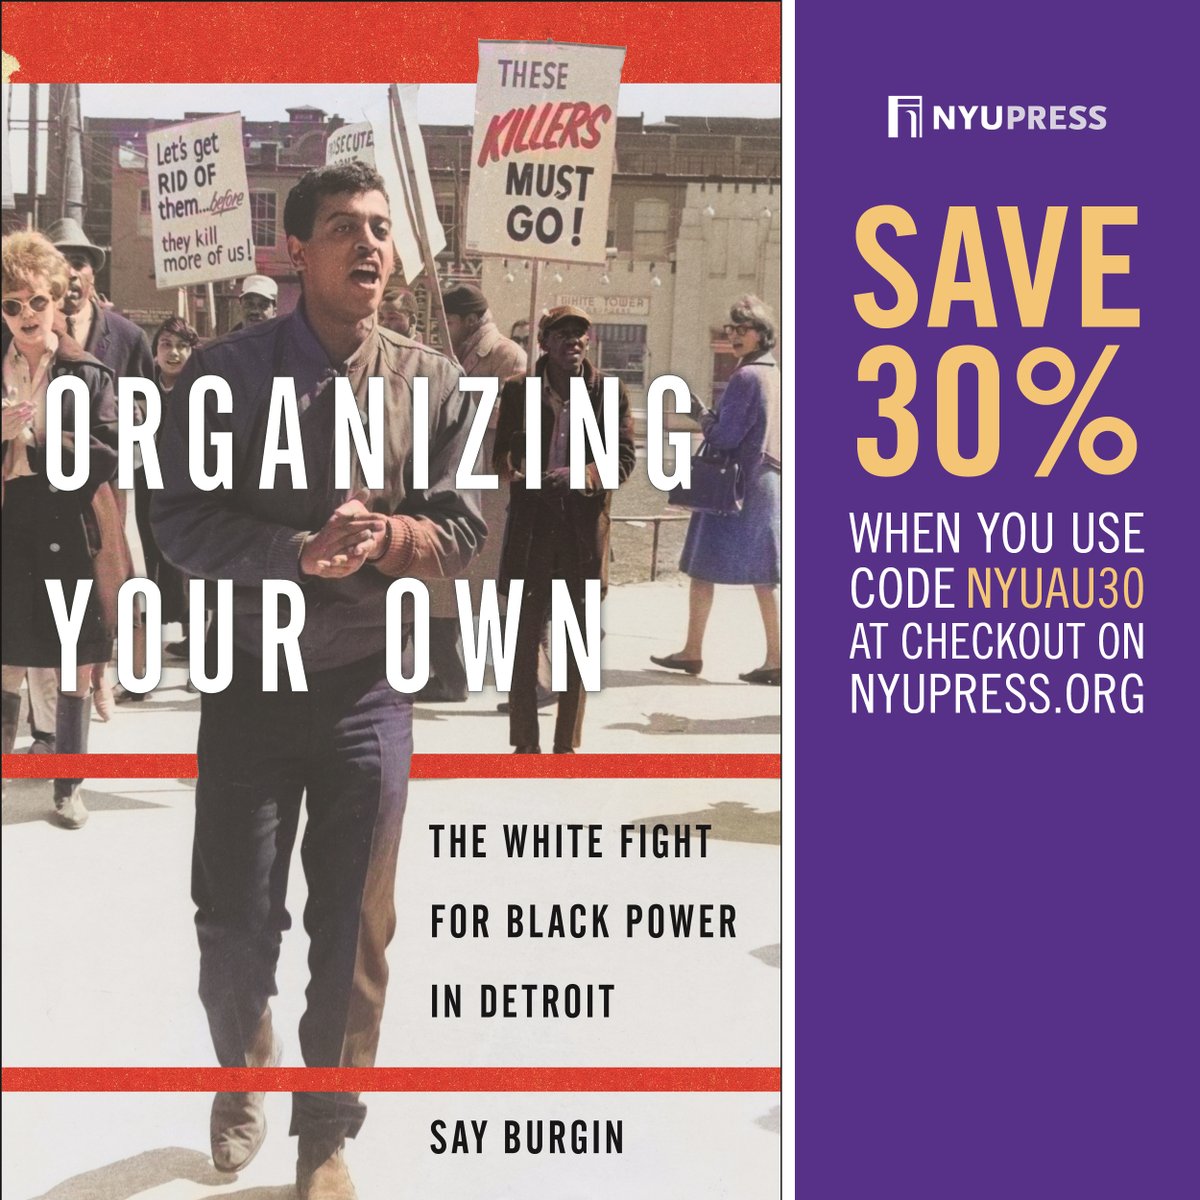 It's pub day for Organizing Your Own! My book pushes back on the old myth that Black Power was anti-white. Groups like SNCC didn't kick white people out. Rather, all over the country, Black-led groups asked white activists to organize white people to support Black liberation.